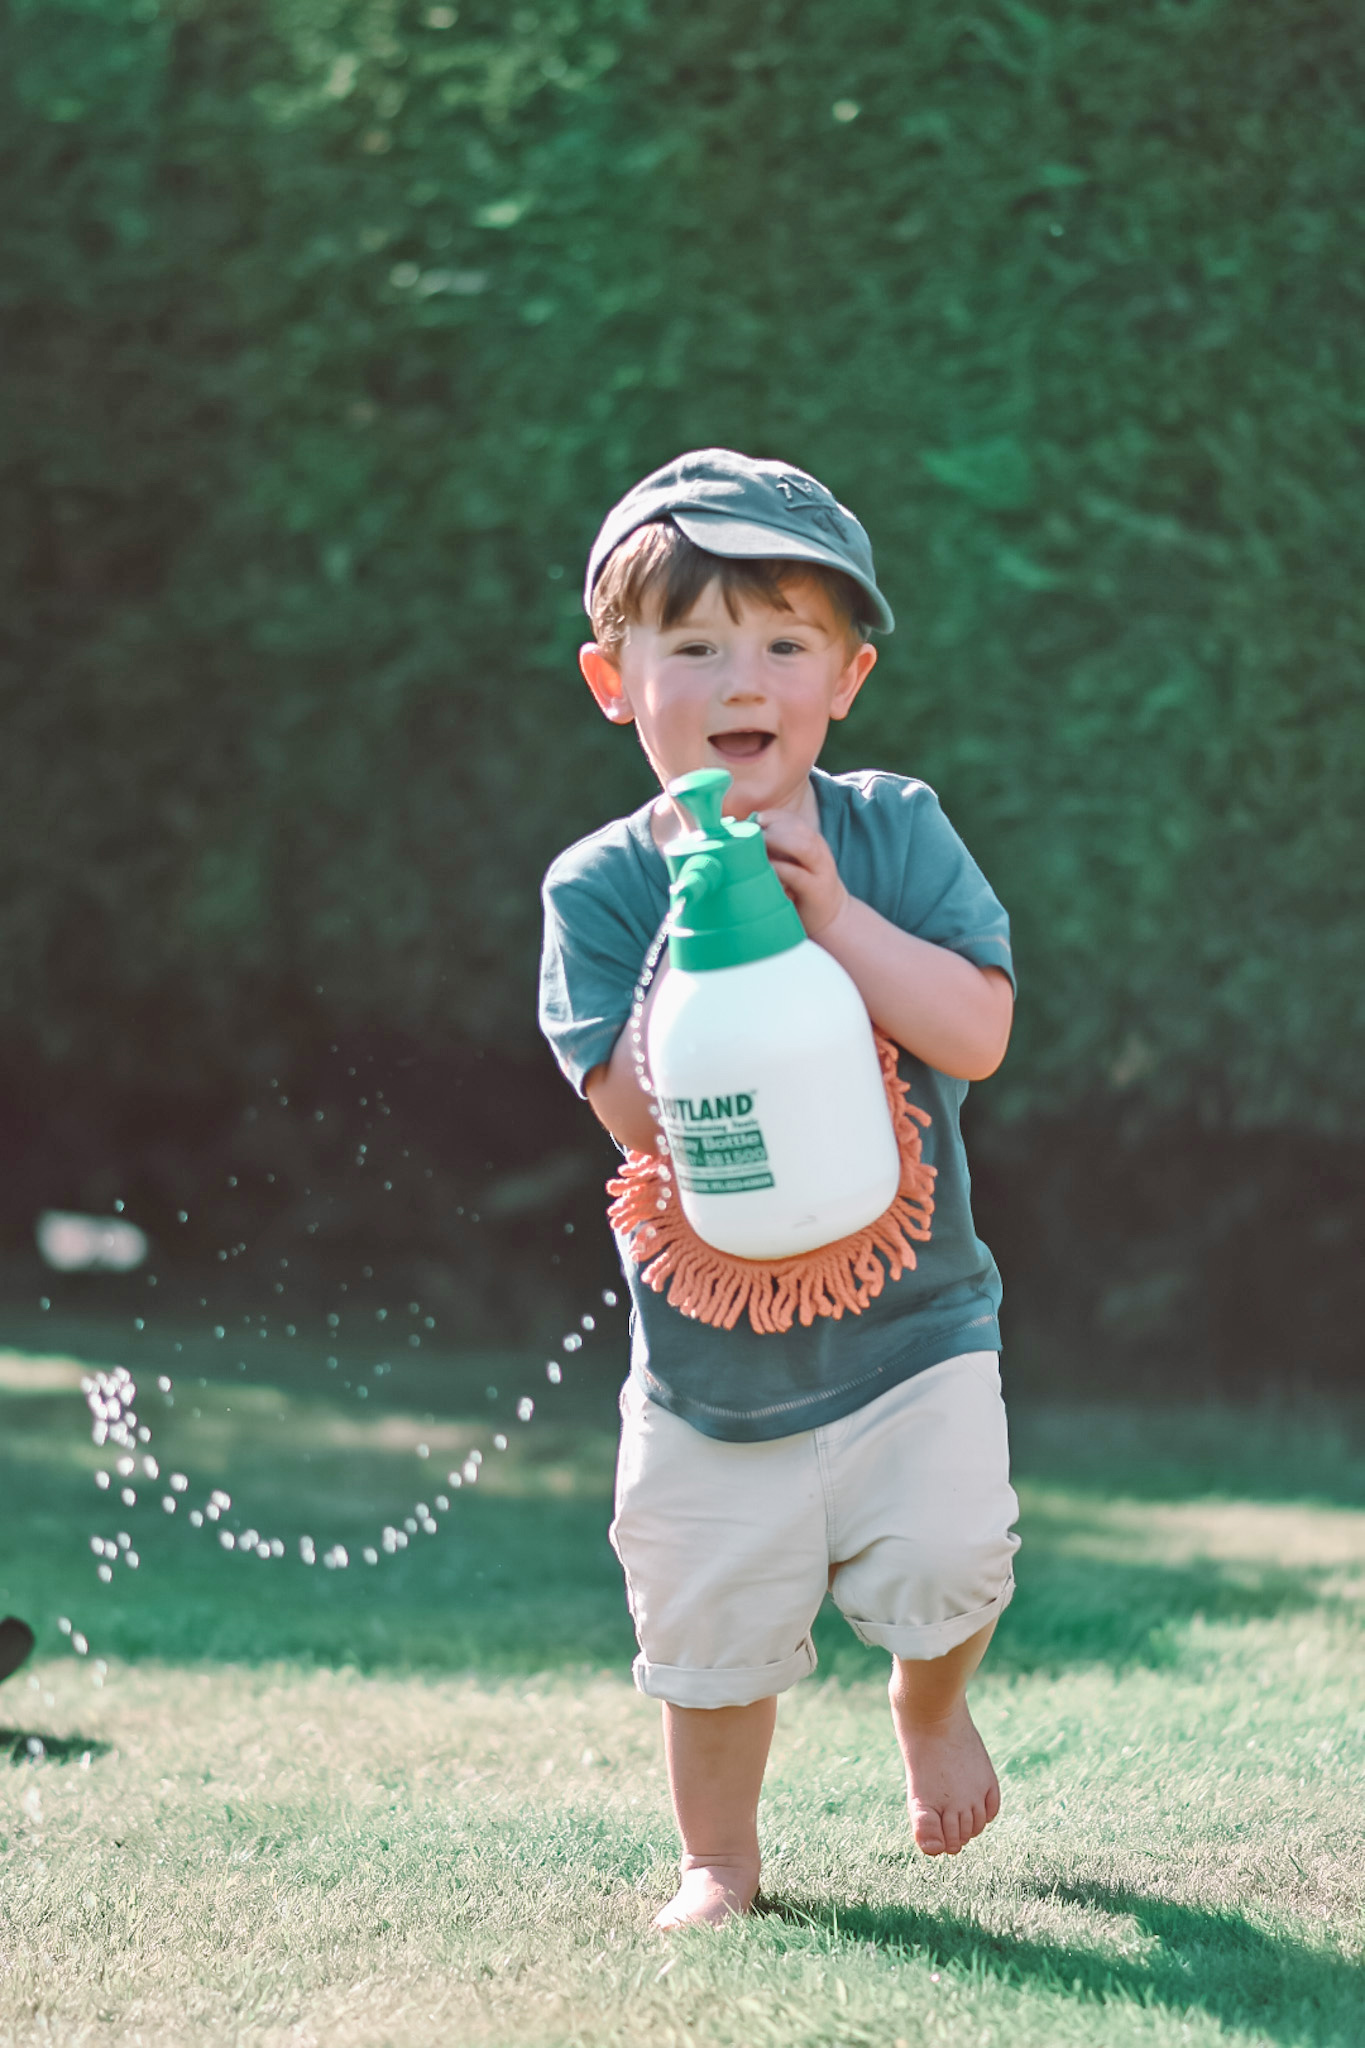 Max playing with a bottle of water in the sun, May 2020